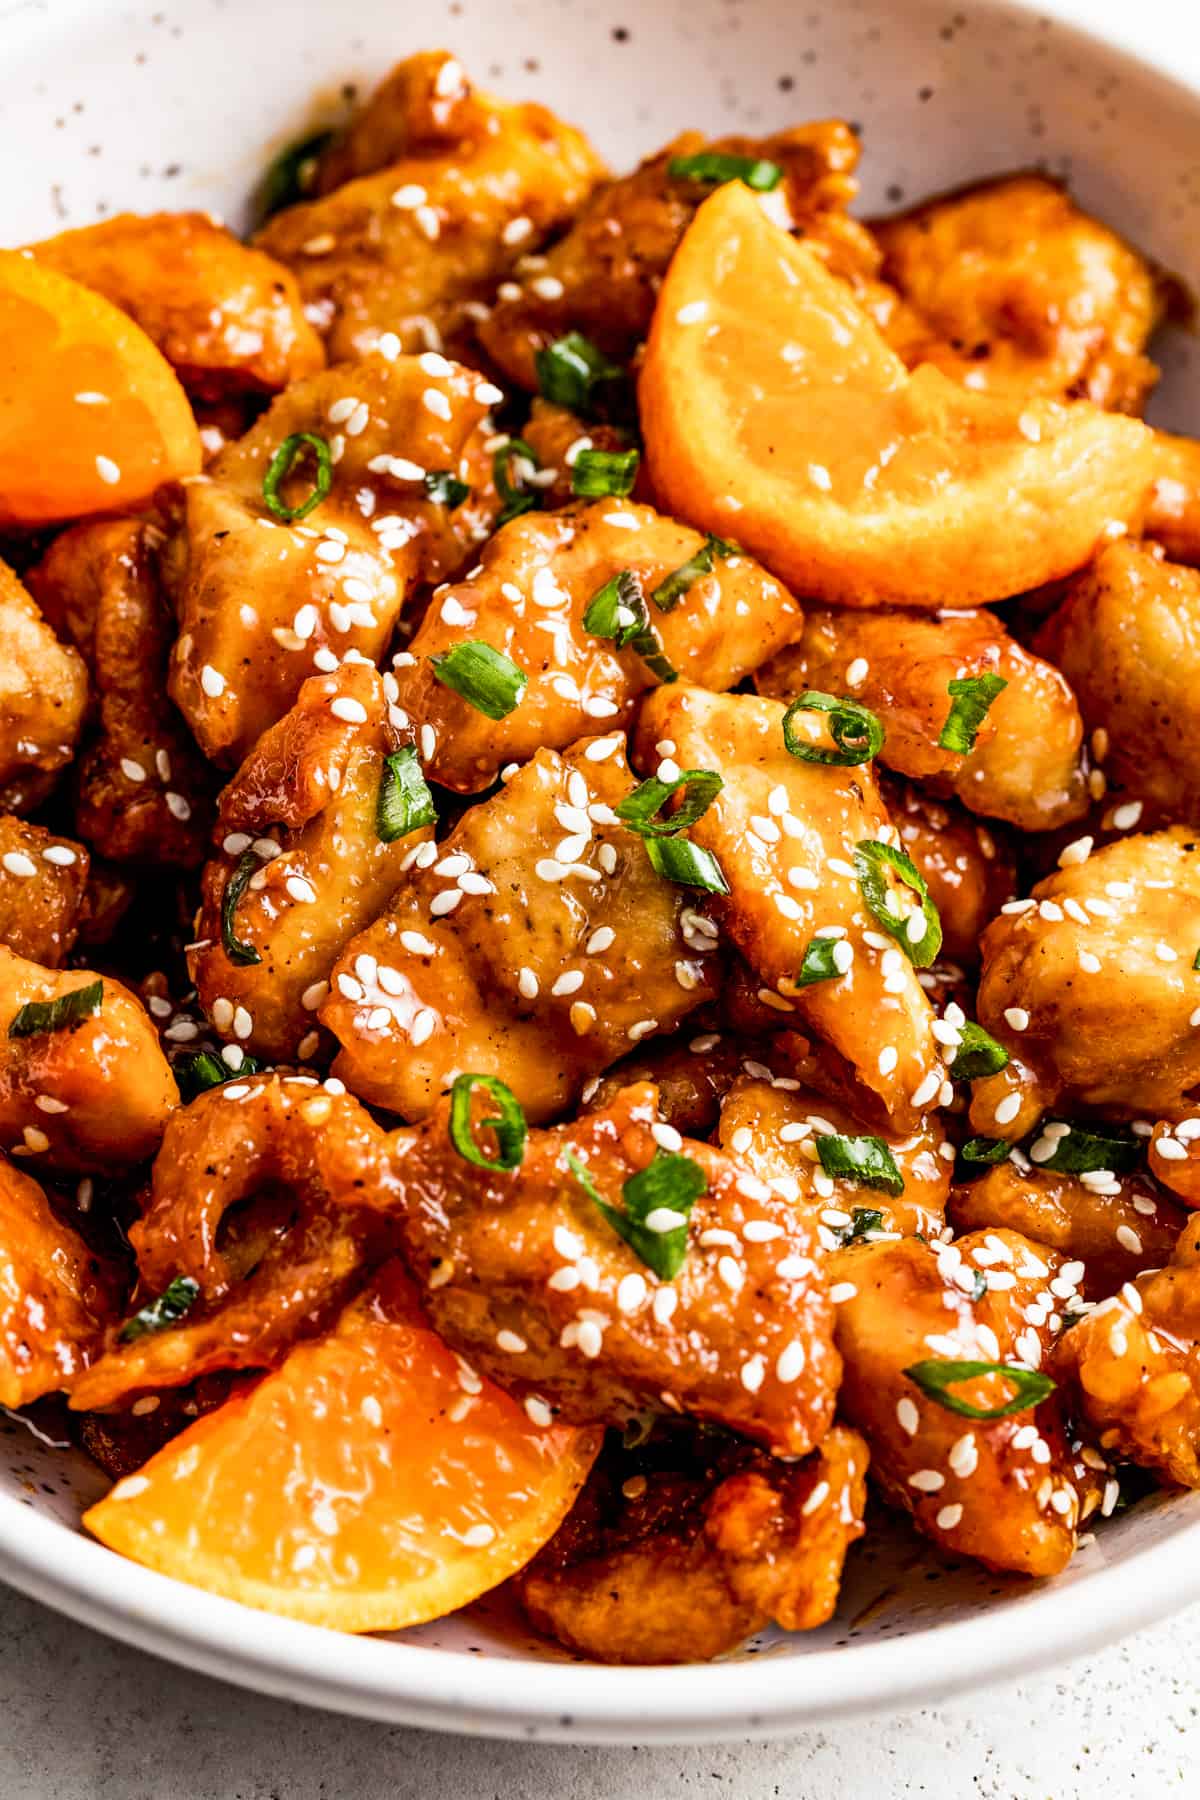 bowl with mandarin chicken and a garnish of sesame seeds over the chicken pieces.